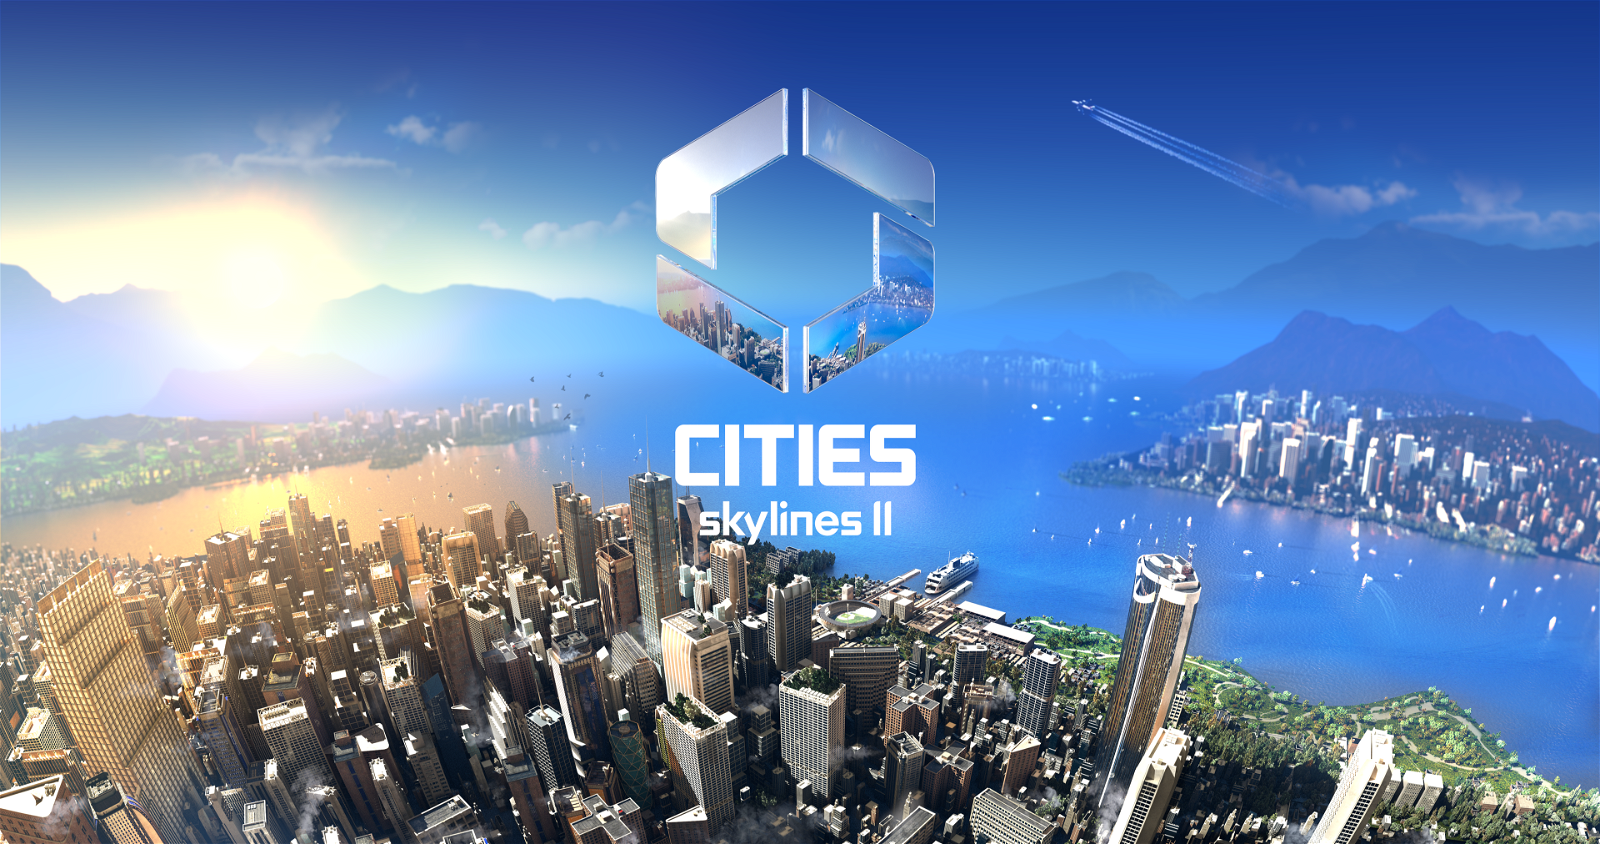 The city-building game by Colossal Order, Cities: Skylines II, will arrive on 24th October